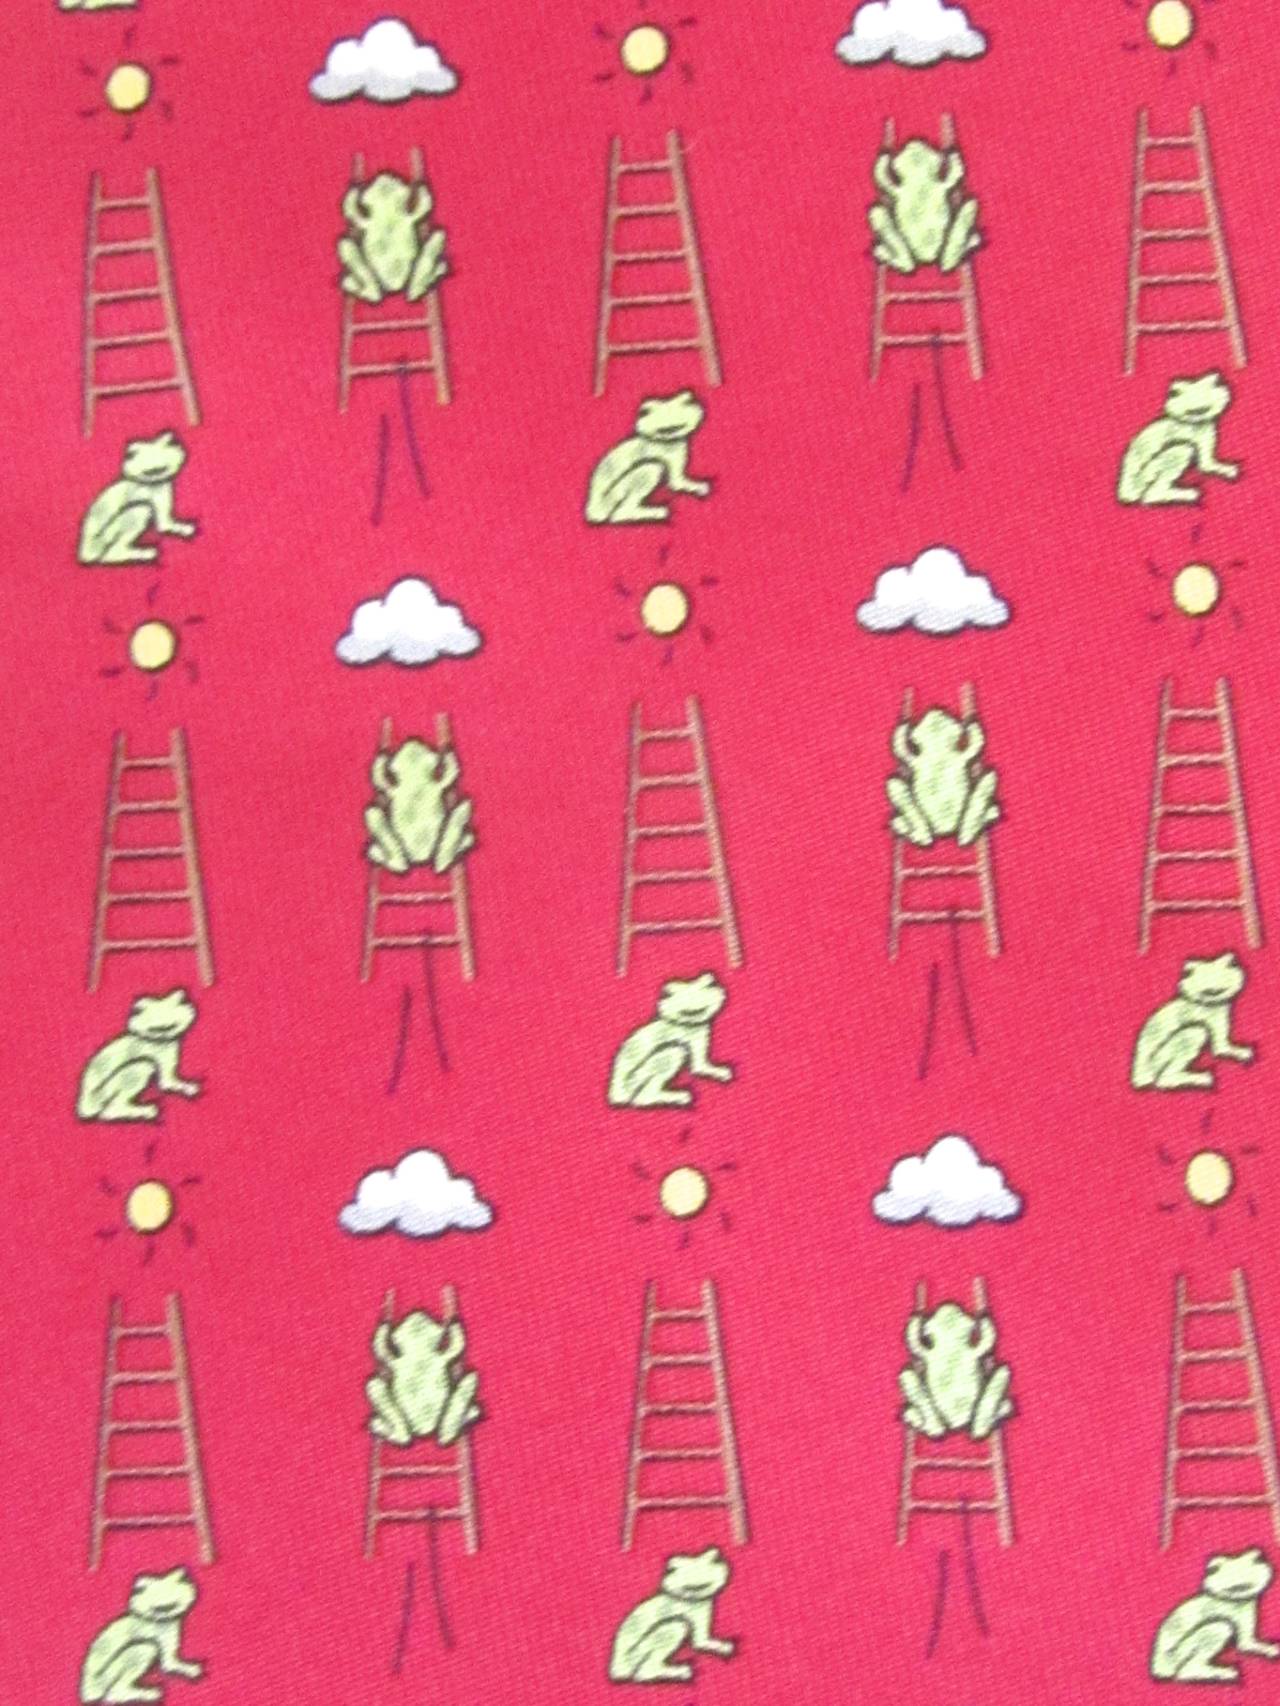 Hermes silk necktie. Tie is made in France and has a red background with images of frogs climbing ladders. Tie is in excellent condition and is from the 1990's. Fantastic addition to any personal tie collection.